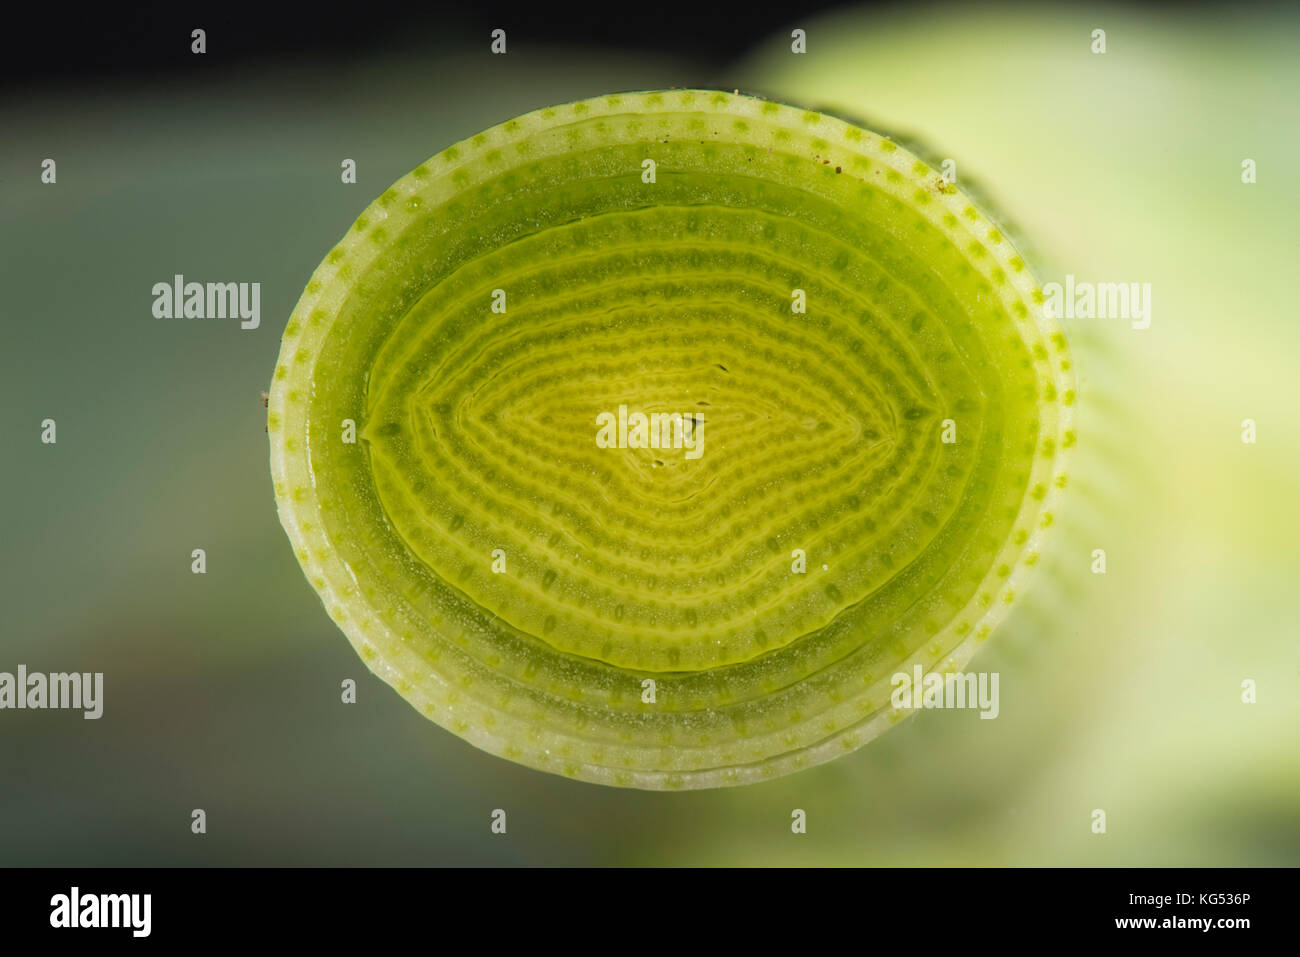 Section through the stem, leaf sheath, of a leek plant, Allium ampeloprasum, showing structure made up of tightly packed leaves Stock Photo